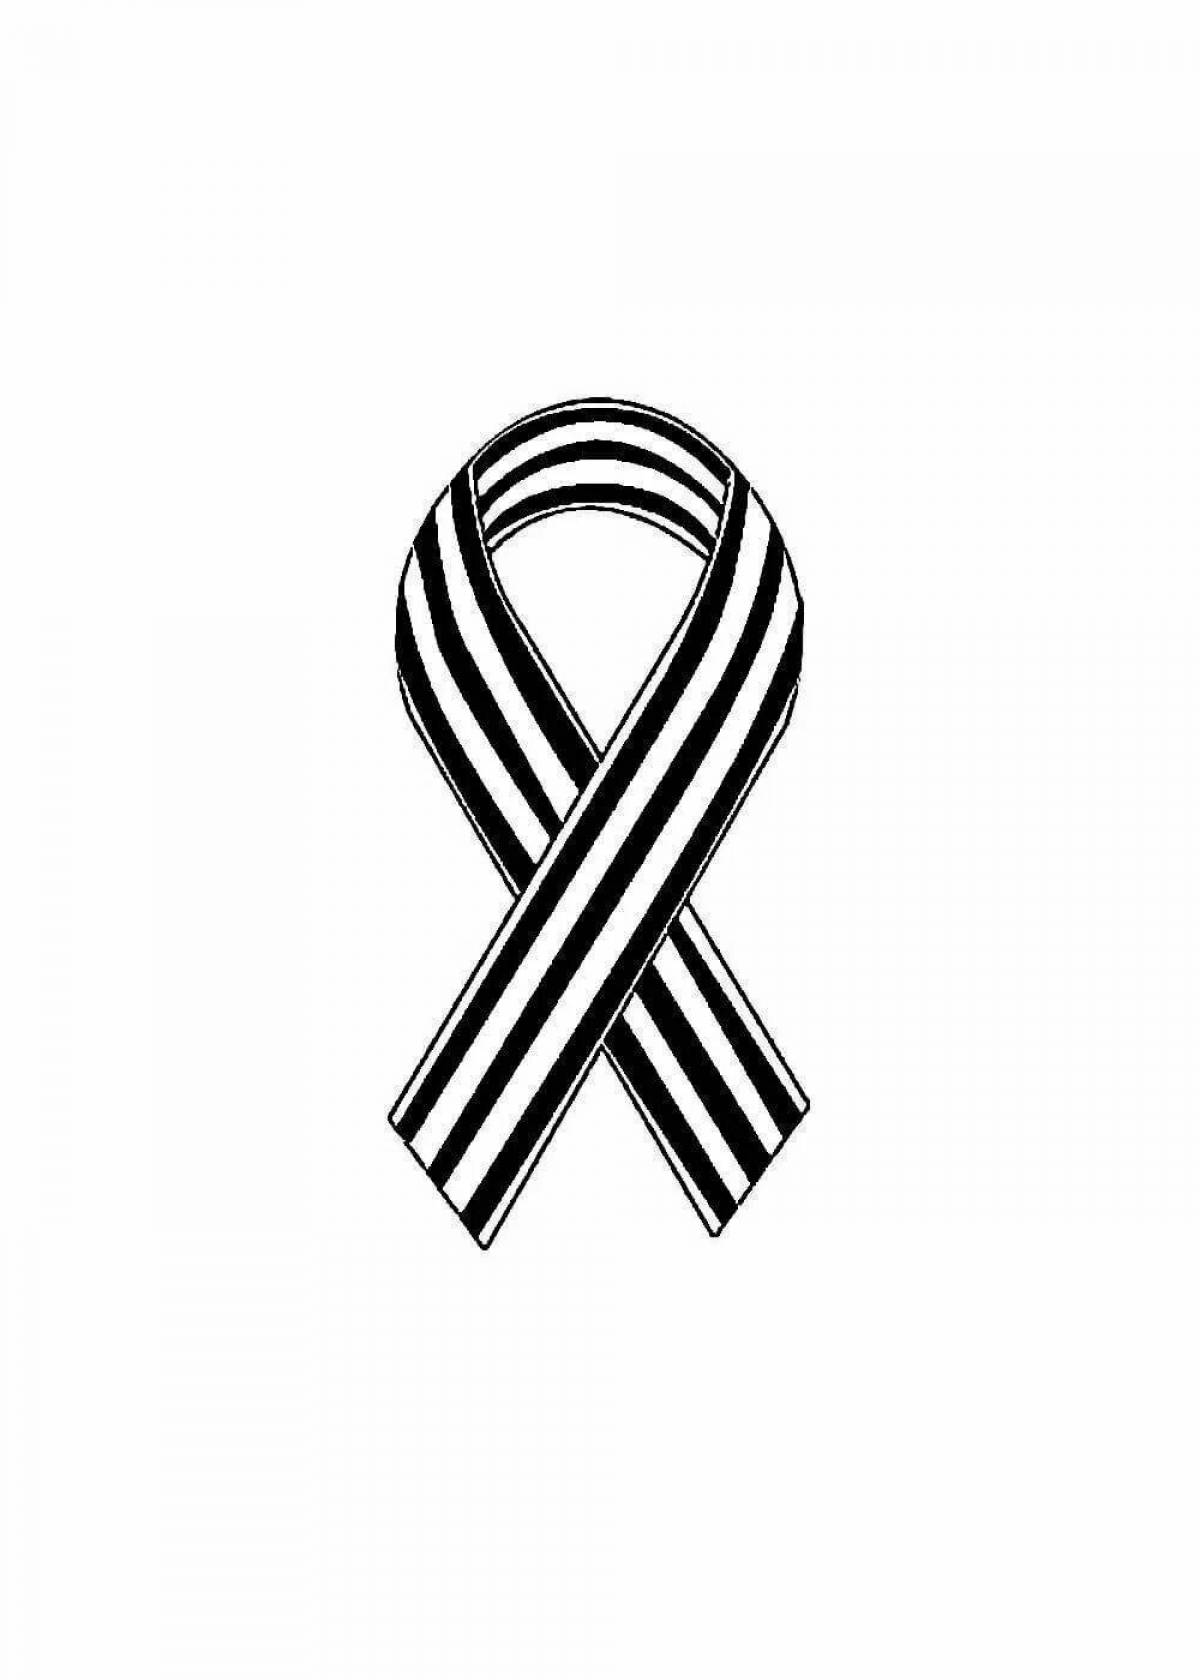 Magnetic St. George ribbon template